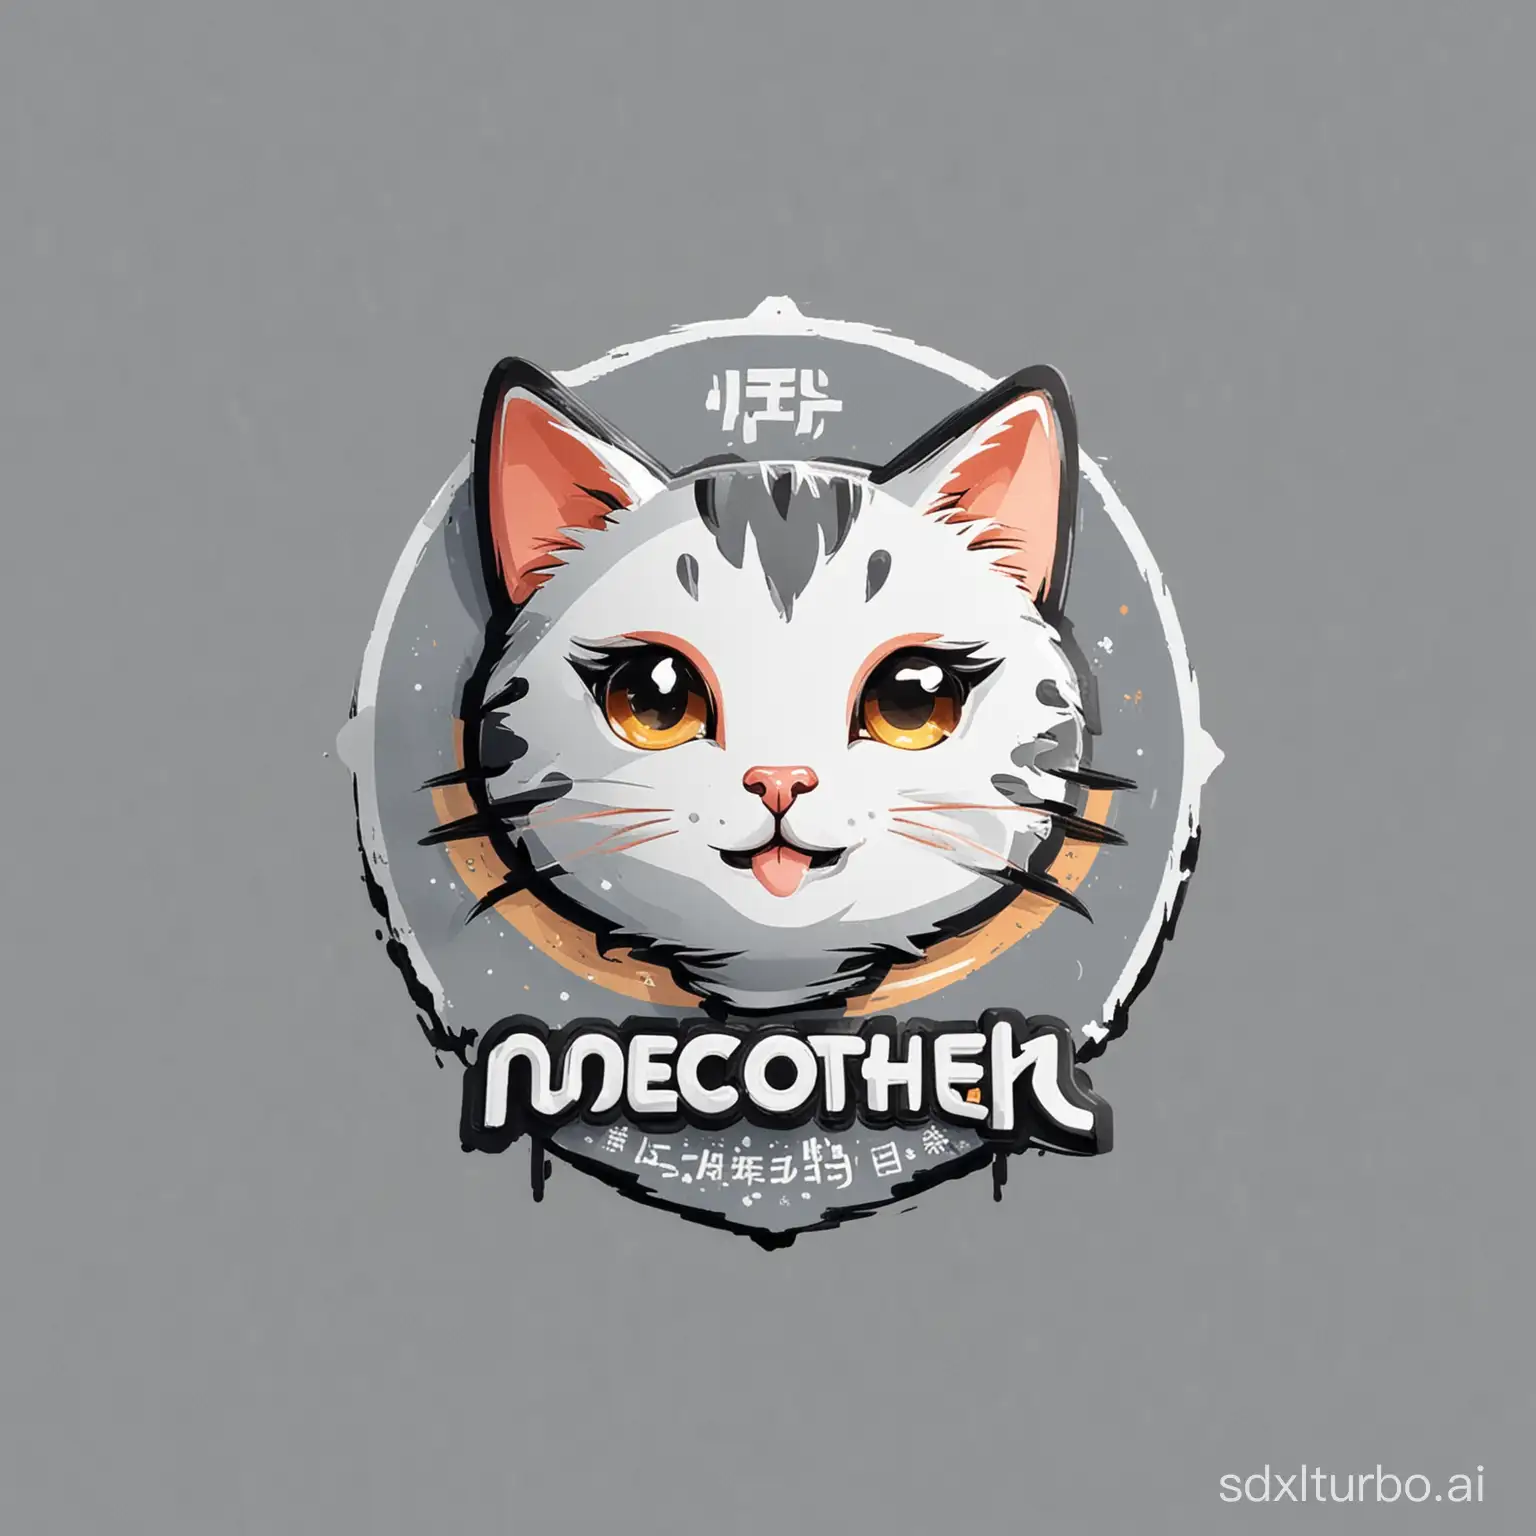 Meow Brother E-Commerce Center

Generate logo